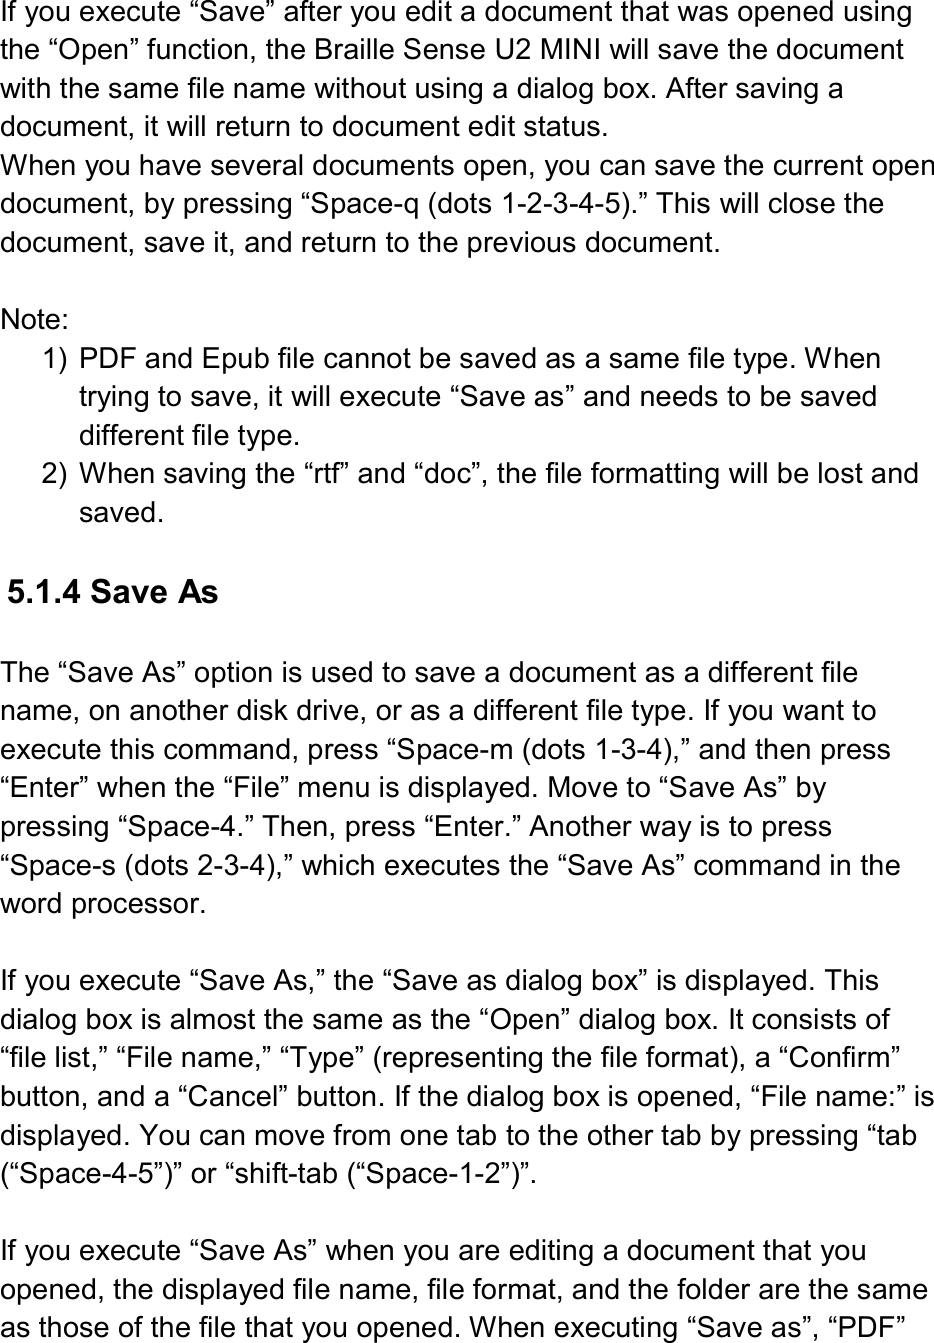   If you execute “Save” after you edit a document that was opened using the “Open” function, the Braille Sense U2 MINI will save the document with the same file name without using a dialog box. After saving a document, it will return to document edit status. When you have several documents open, you can save the current open document, by pressing “Space-q (dots 1-2-3-4-5).” This will close the document, save it, and return to the previous document.  Note: 1)  PDF and Epub file cannot be saved as a same file type. When trying to save, it will execute “Save as” and needs to be saved different file type.   2)  When saving the “rtf” and “doc”, the file formatting will be lost and saved.    5.1.4 Save As  The “Save As” option is used to save a document as a different file name, on another disk drive, or as a different file type. If you want to execute this command, press “Space-m (dots 1-3-4),” and then press “Enter” when the “File” menu is displayed. Move to “Save As” by pressing “Space-4.” Then, press “Enter.” Another way is to press “Space-s (dots 2-3-4),” which executes the “Save As” command in the word processor.  If you execute “Save As,” the “Save as dialog box” is displayed. This dialog box is almost the same as the “Open” dialog box. It consists of “file list,” “File name,” “Type” (representing the file format), a “Confirm” button, and a “Cancel” button. If the dialog box is opened, “File name:” is displayed. You can move from one tab to the other tab by pressing “tab (“Space-4-5”)” or “shift-tab (“Space-1-2”)”.  If you execute “Save As” when you are editing a document that you opened, the displayed file name, file format, and the folder are the same as those of the file that you opened. When executing “Save as”, “PDF” 